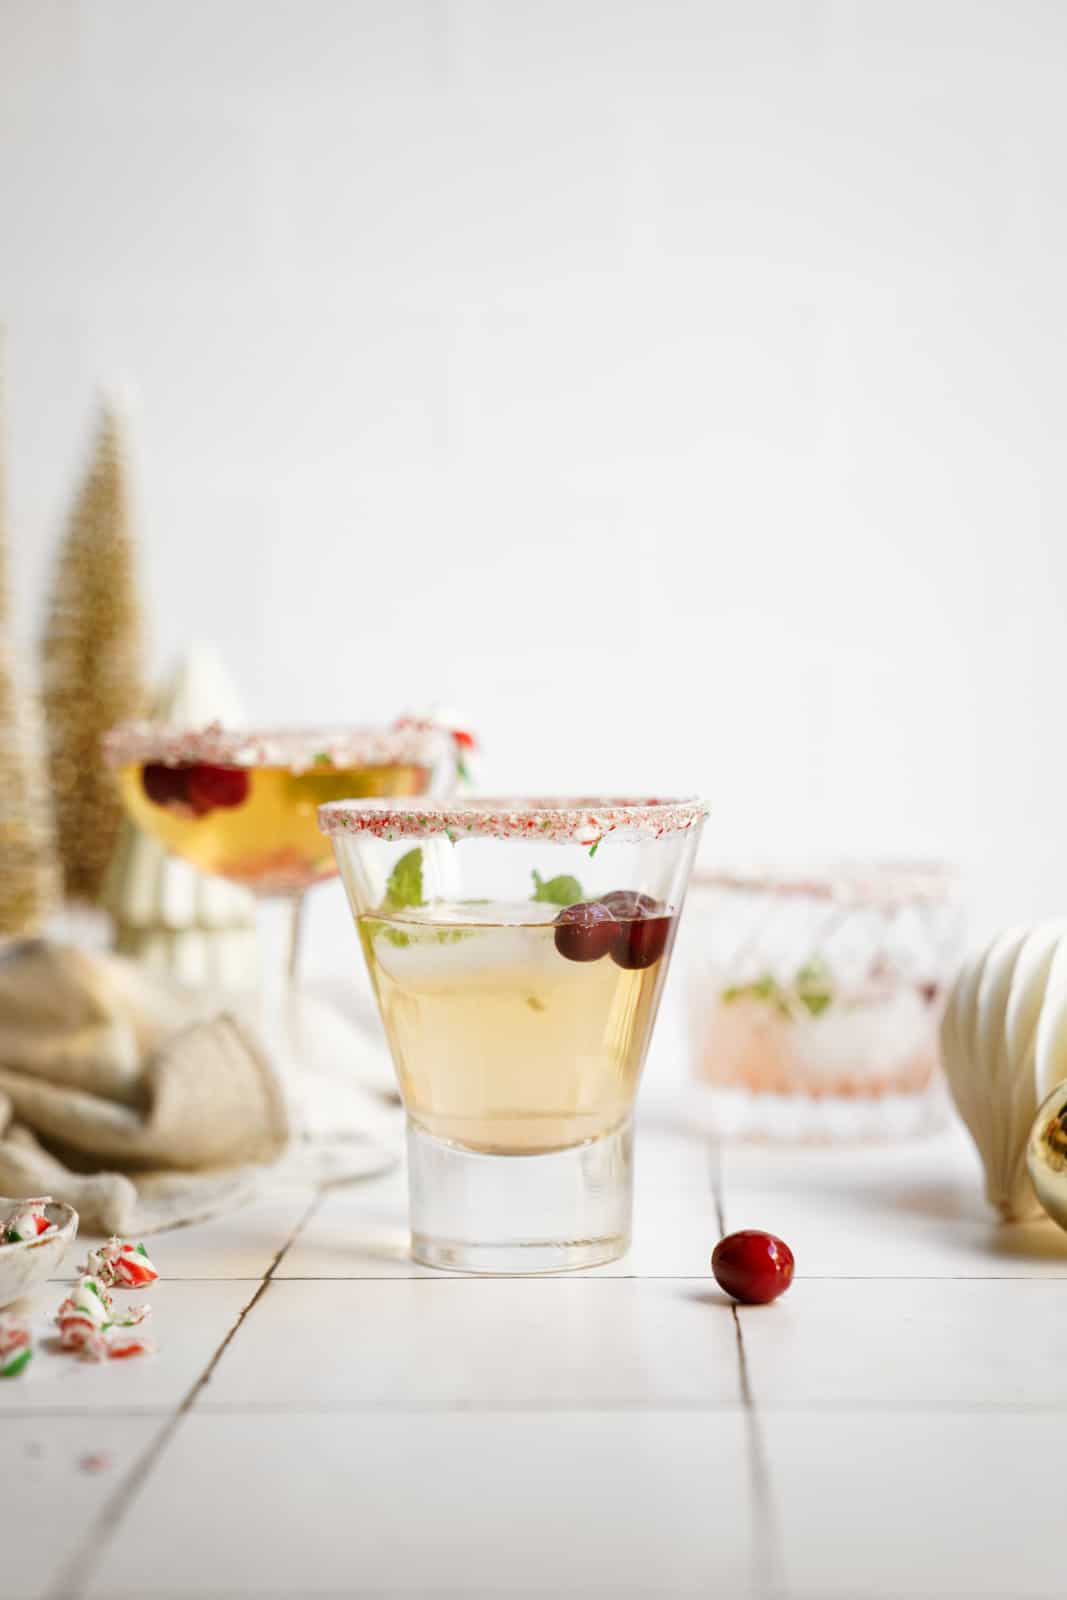 https://www.foodbymaria.com/wp-content/uploads/2020/12/Easy-Candy-Cane-Martini.jpg